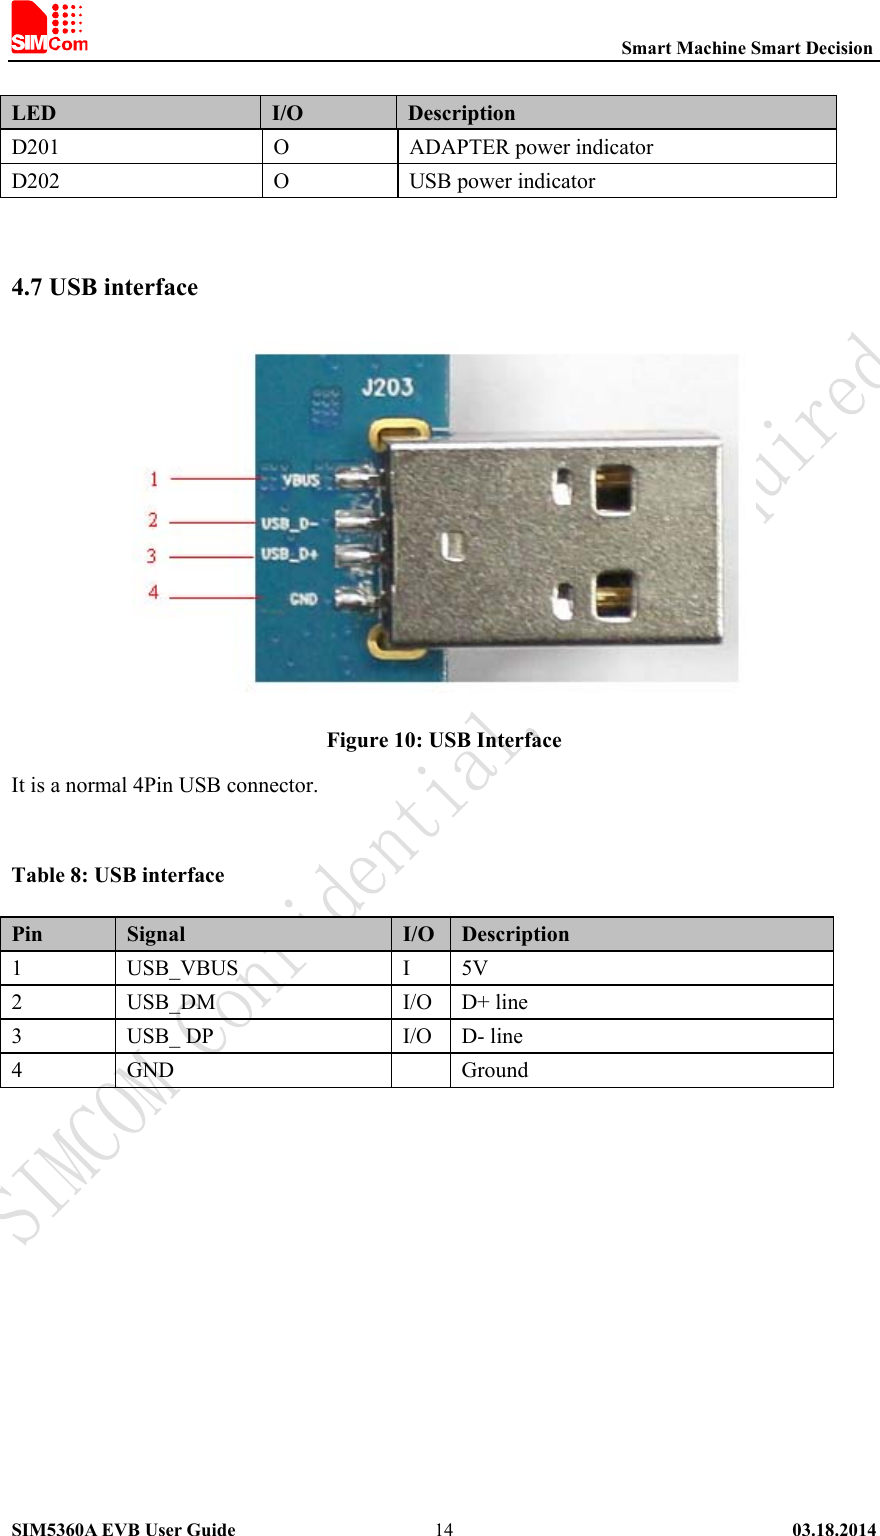                                                          Smart Machine Smart Decision SIM5360A EVB User Guide   03.18.2014   14 LED  I/O  Description D201  O ADAPTER power indicator D202  O USB power indicator  4.7 USB interface  Figure 10: USB Interface It is a normal 4Pin USB connector.  Table 8: USB interface Pin  Signal  I/O Description 1  USB_VBUS  I 5V 2  USB_DM  I/O D+ line 3  USB_ DP  I/O D- line 4  GND   Ground   